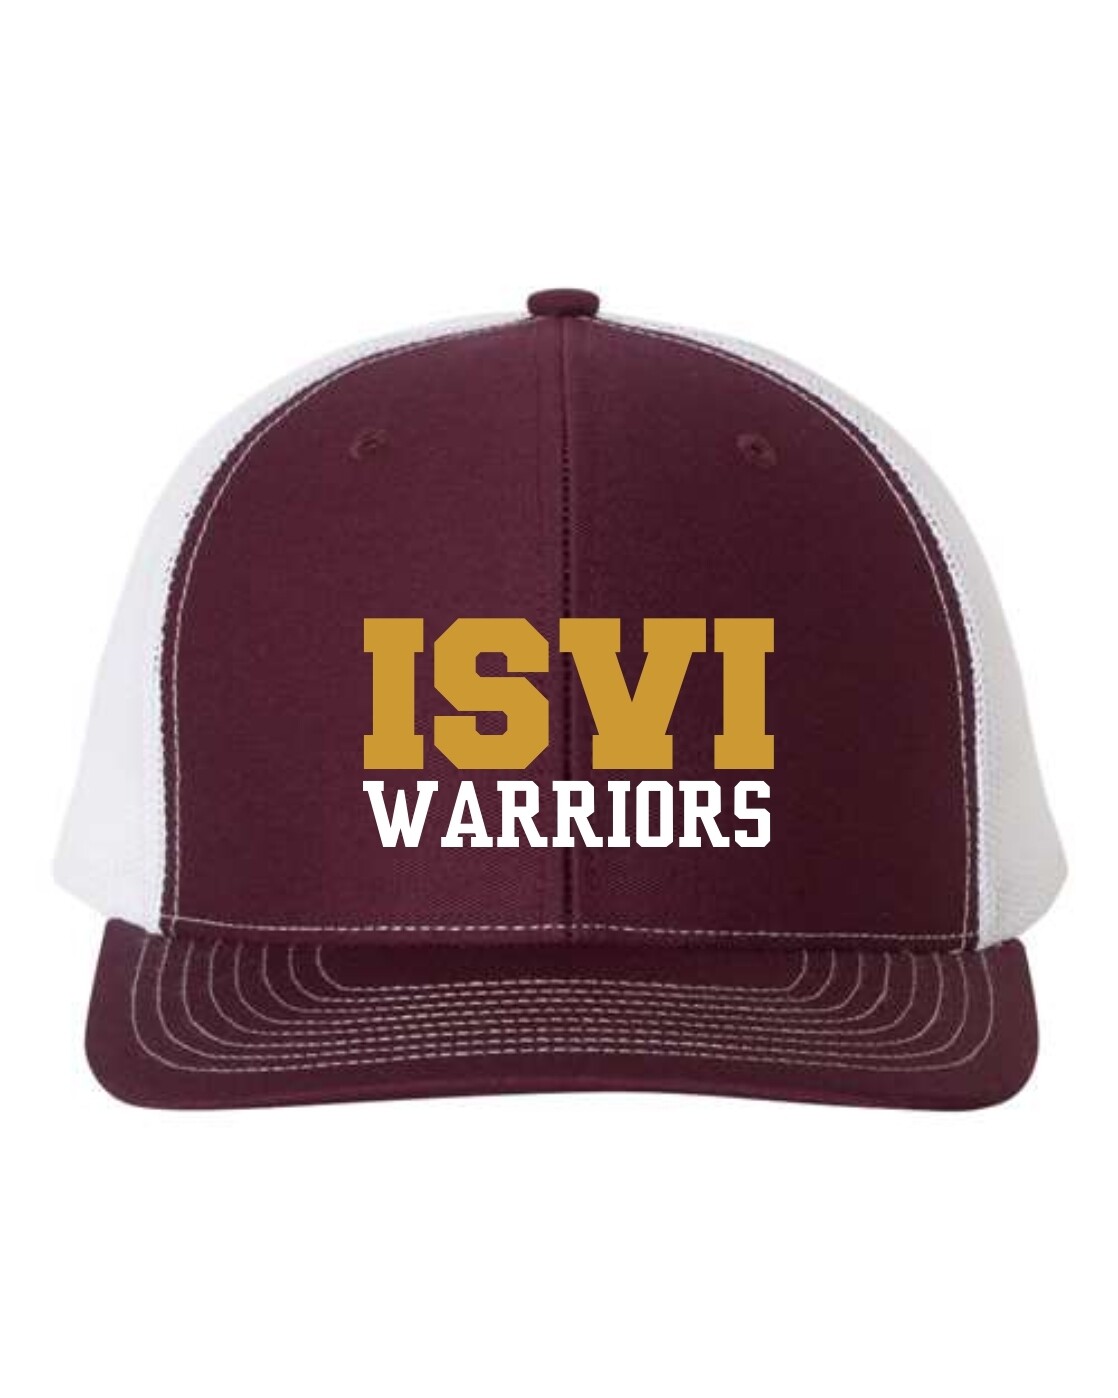 WARRIORS-EMBROIDERED TRUCKERS HAT-112